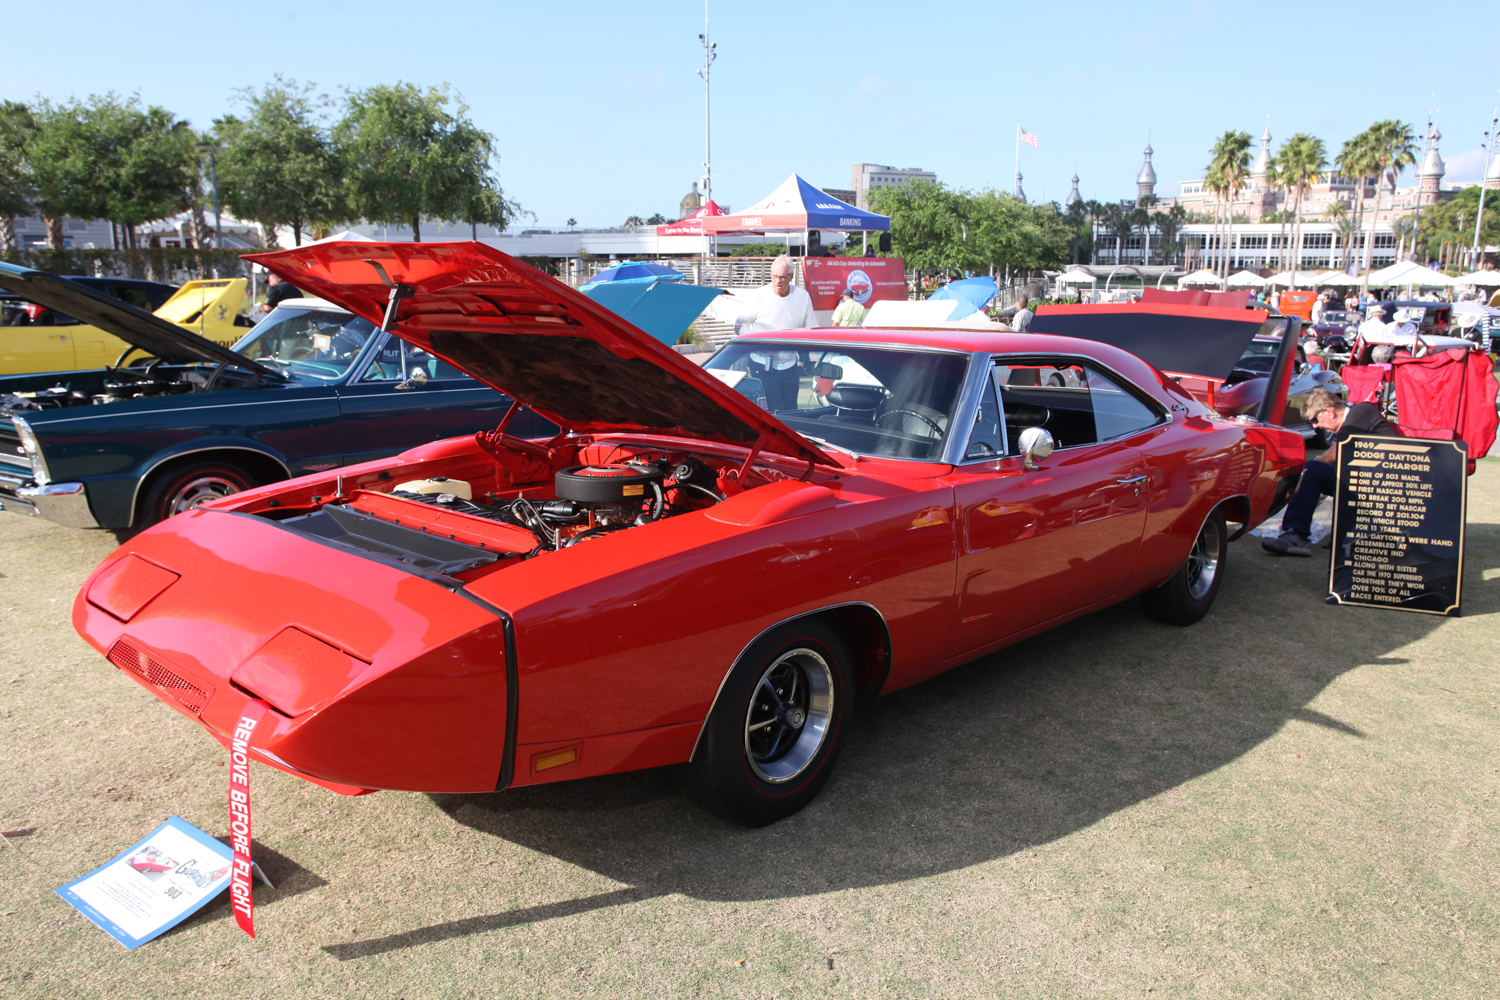 Unusual to see a '69 Dodge Daytona.  Superbirds seem to be more numerous.